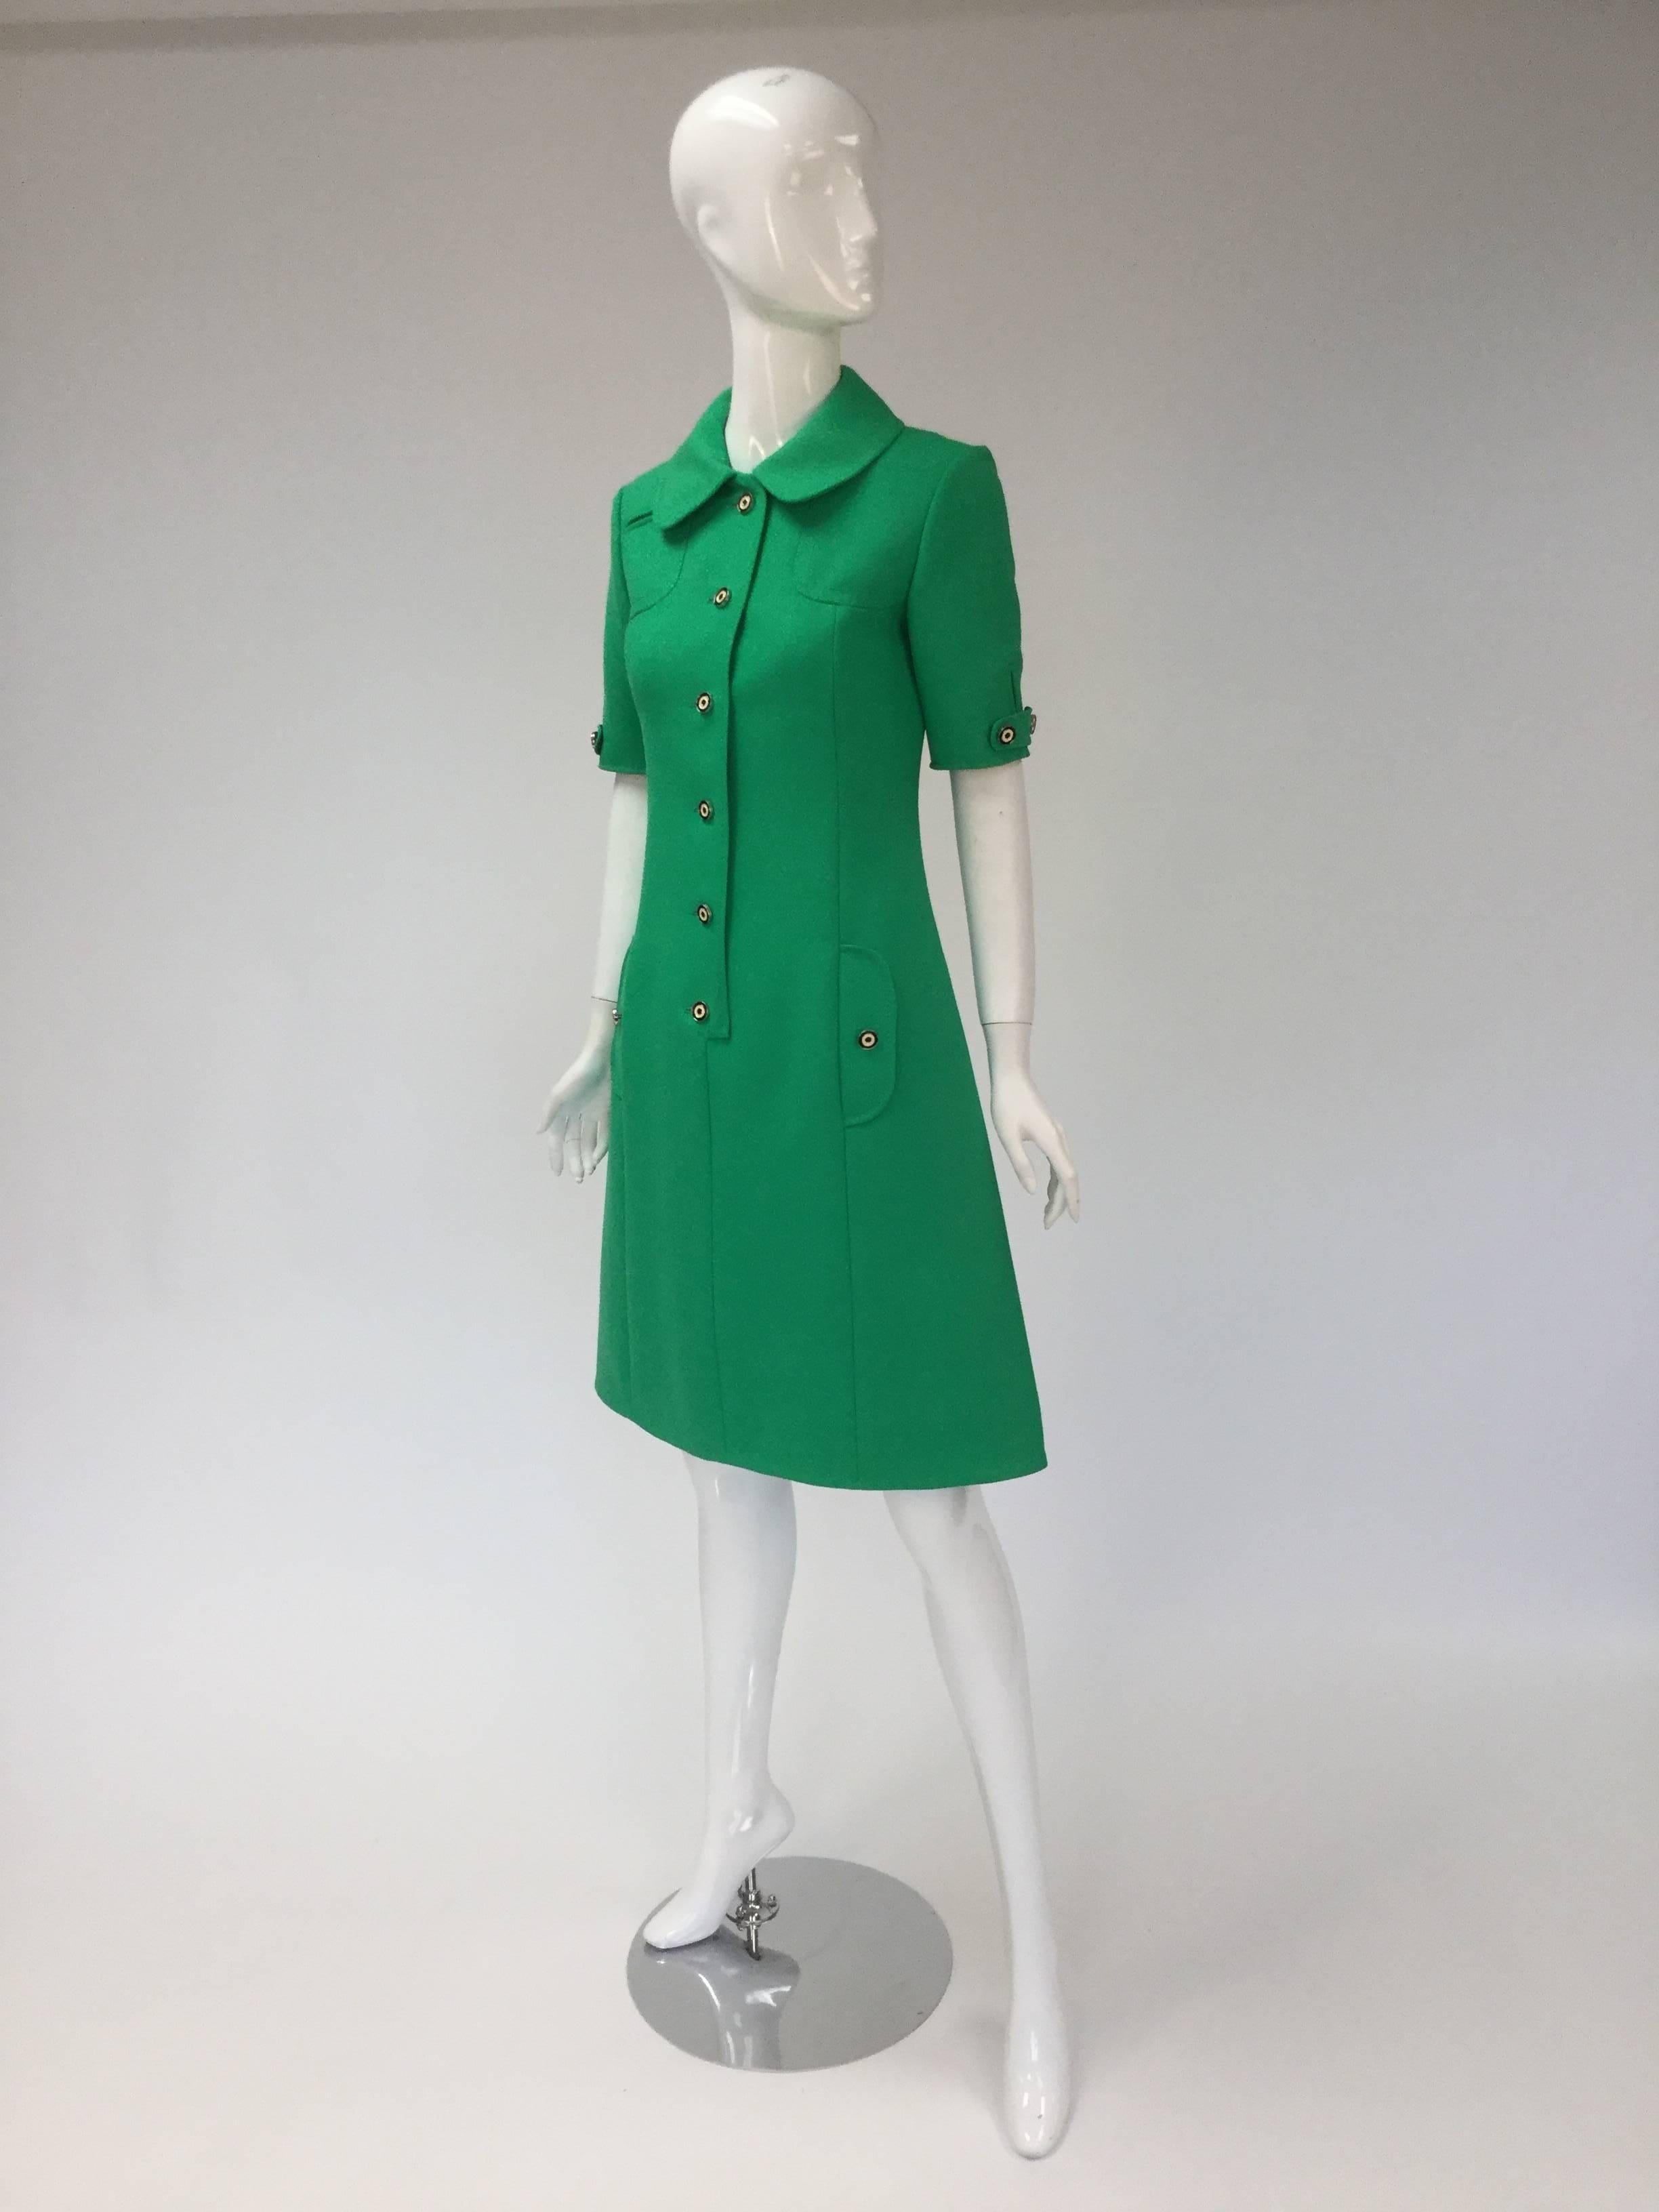 Wonderful and classic green wool dress from Louis Feraud.  Wear it day or night, dress it up or down with flats for a 60's vibe or heels for a power look.  

Dress features six black and white buttons running down the front center of dress, as